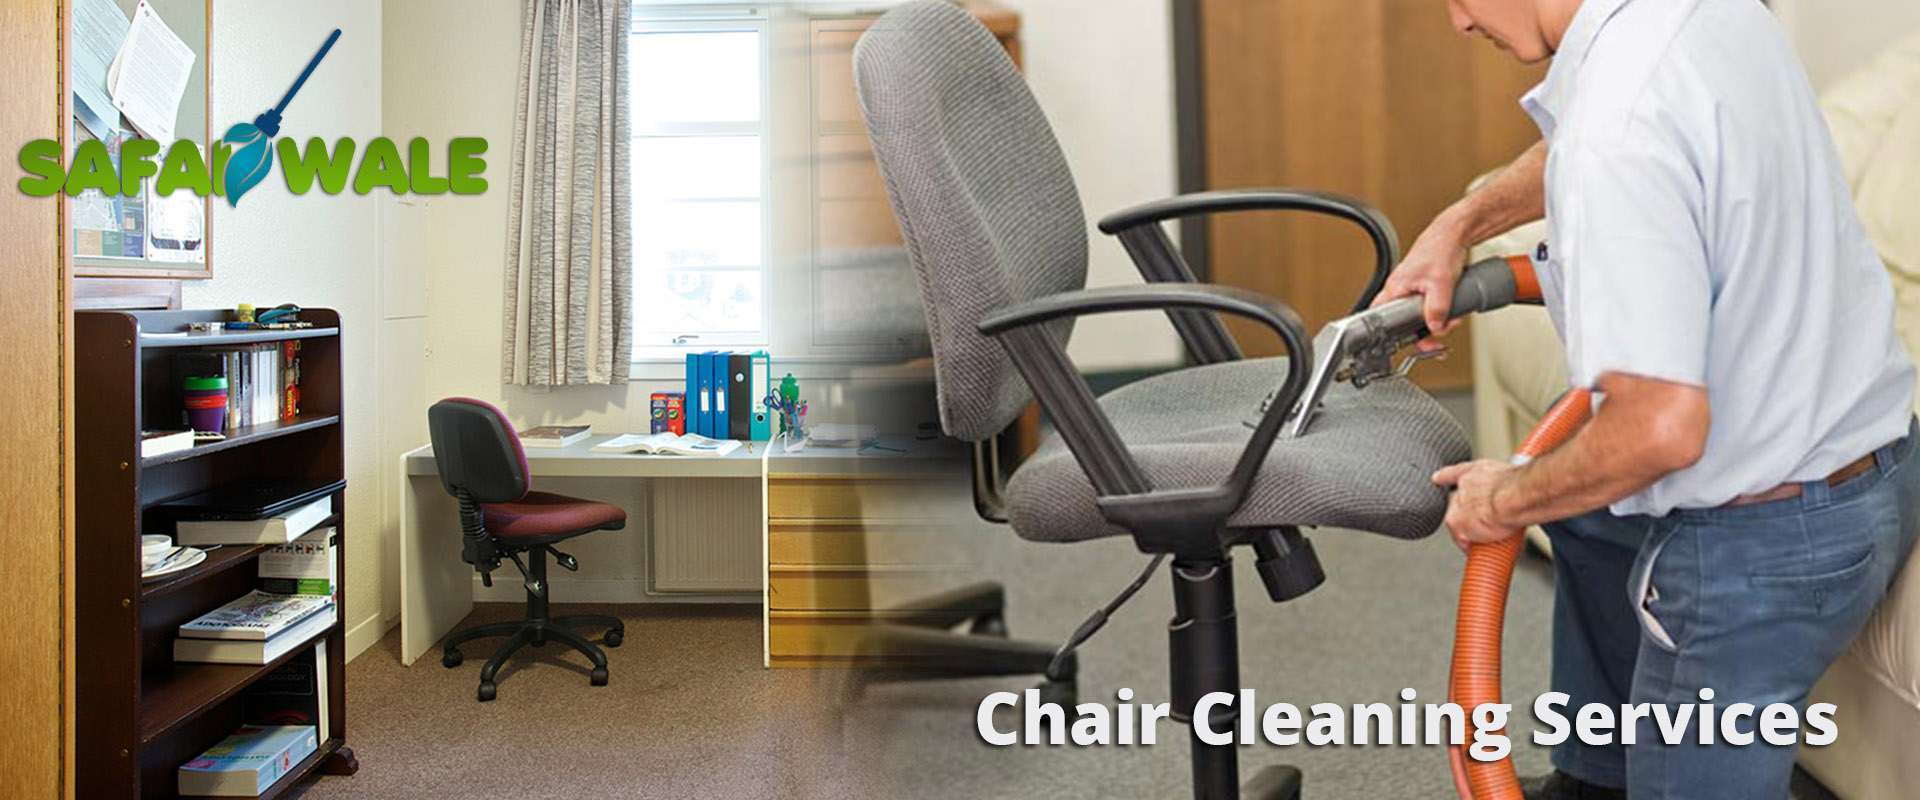 chair cleaning services in delhi ncr